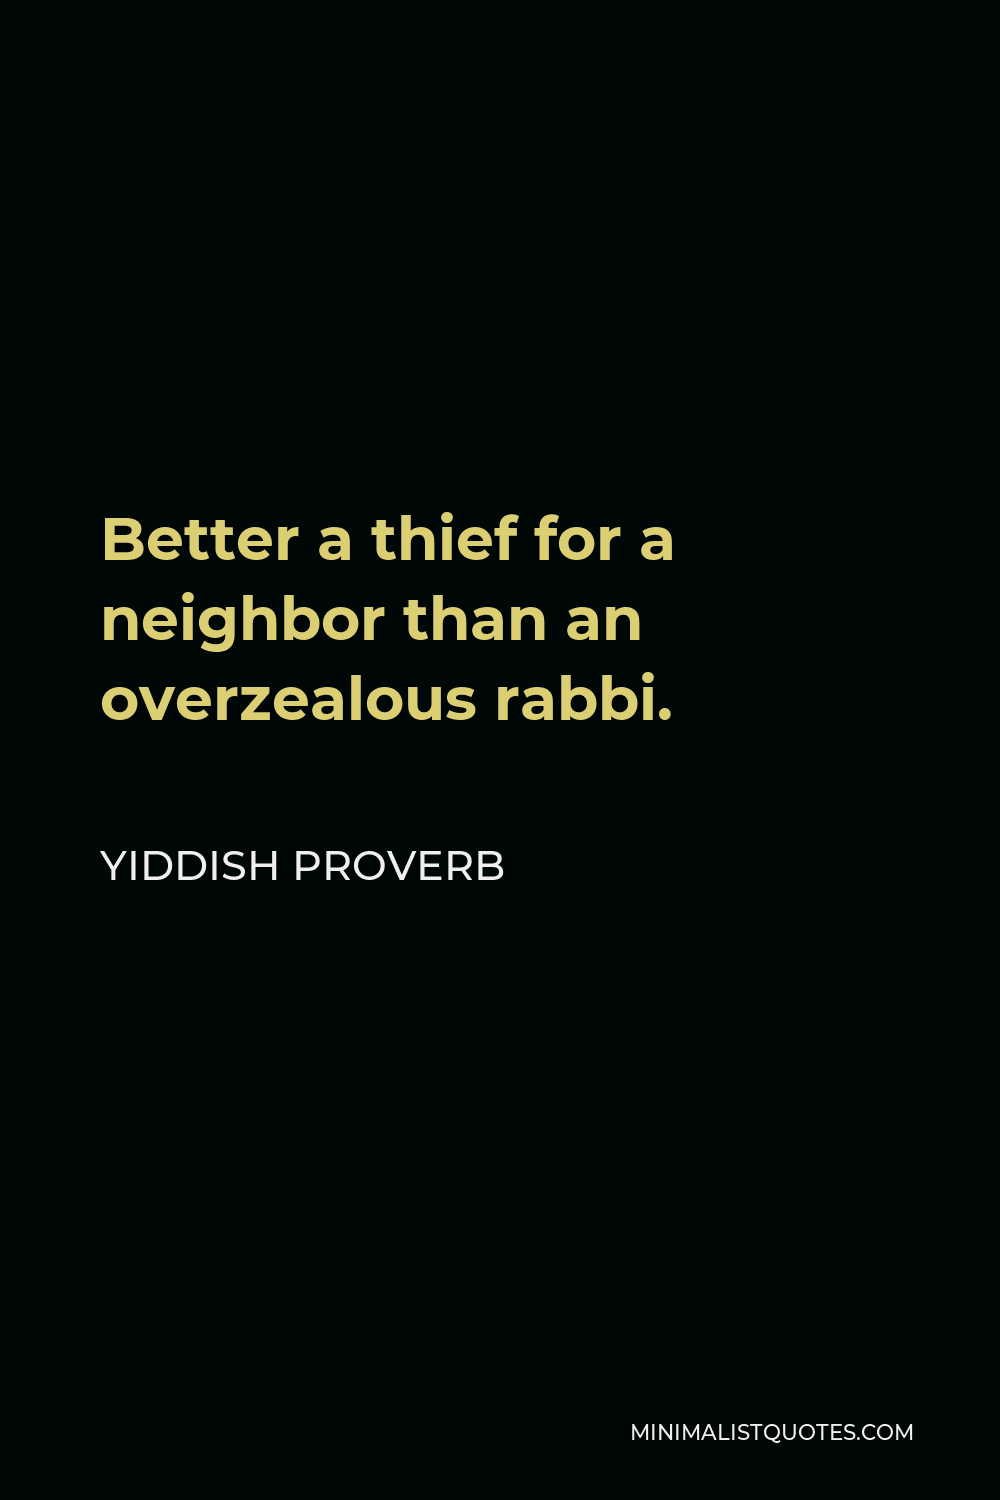 Yiddish Proverb Quote - Better a thief for a neighbor than an overzealous rabbi.